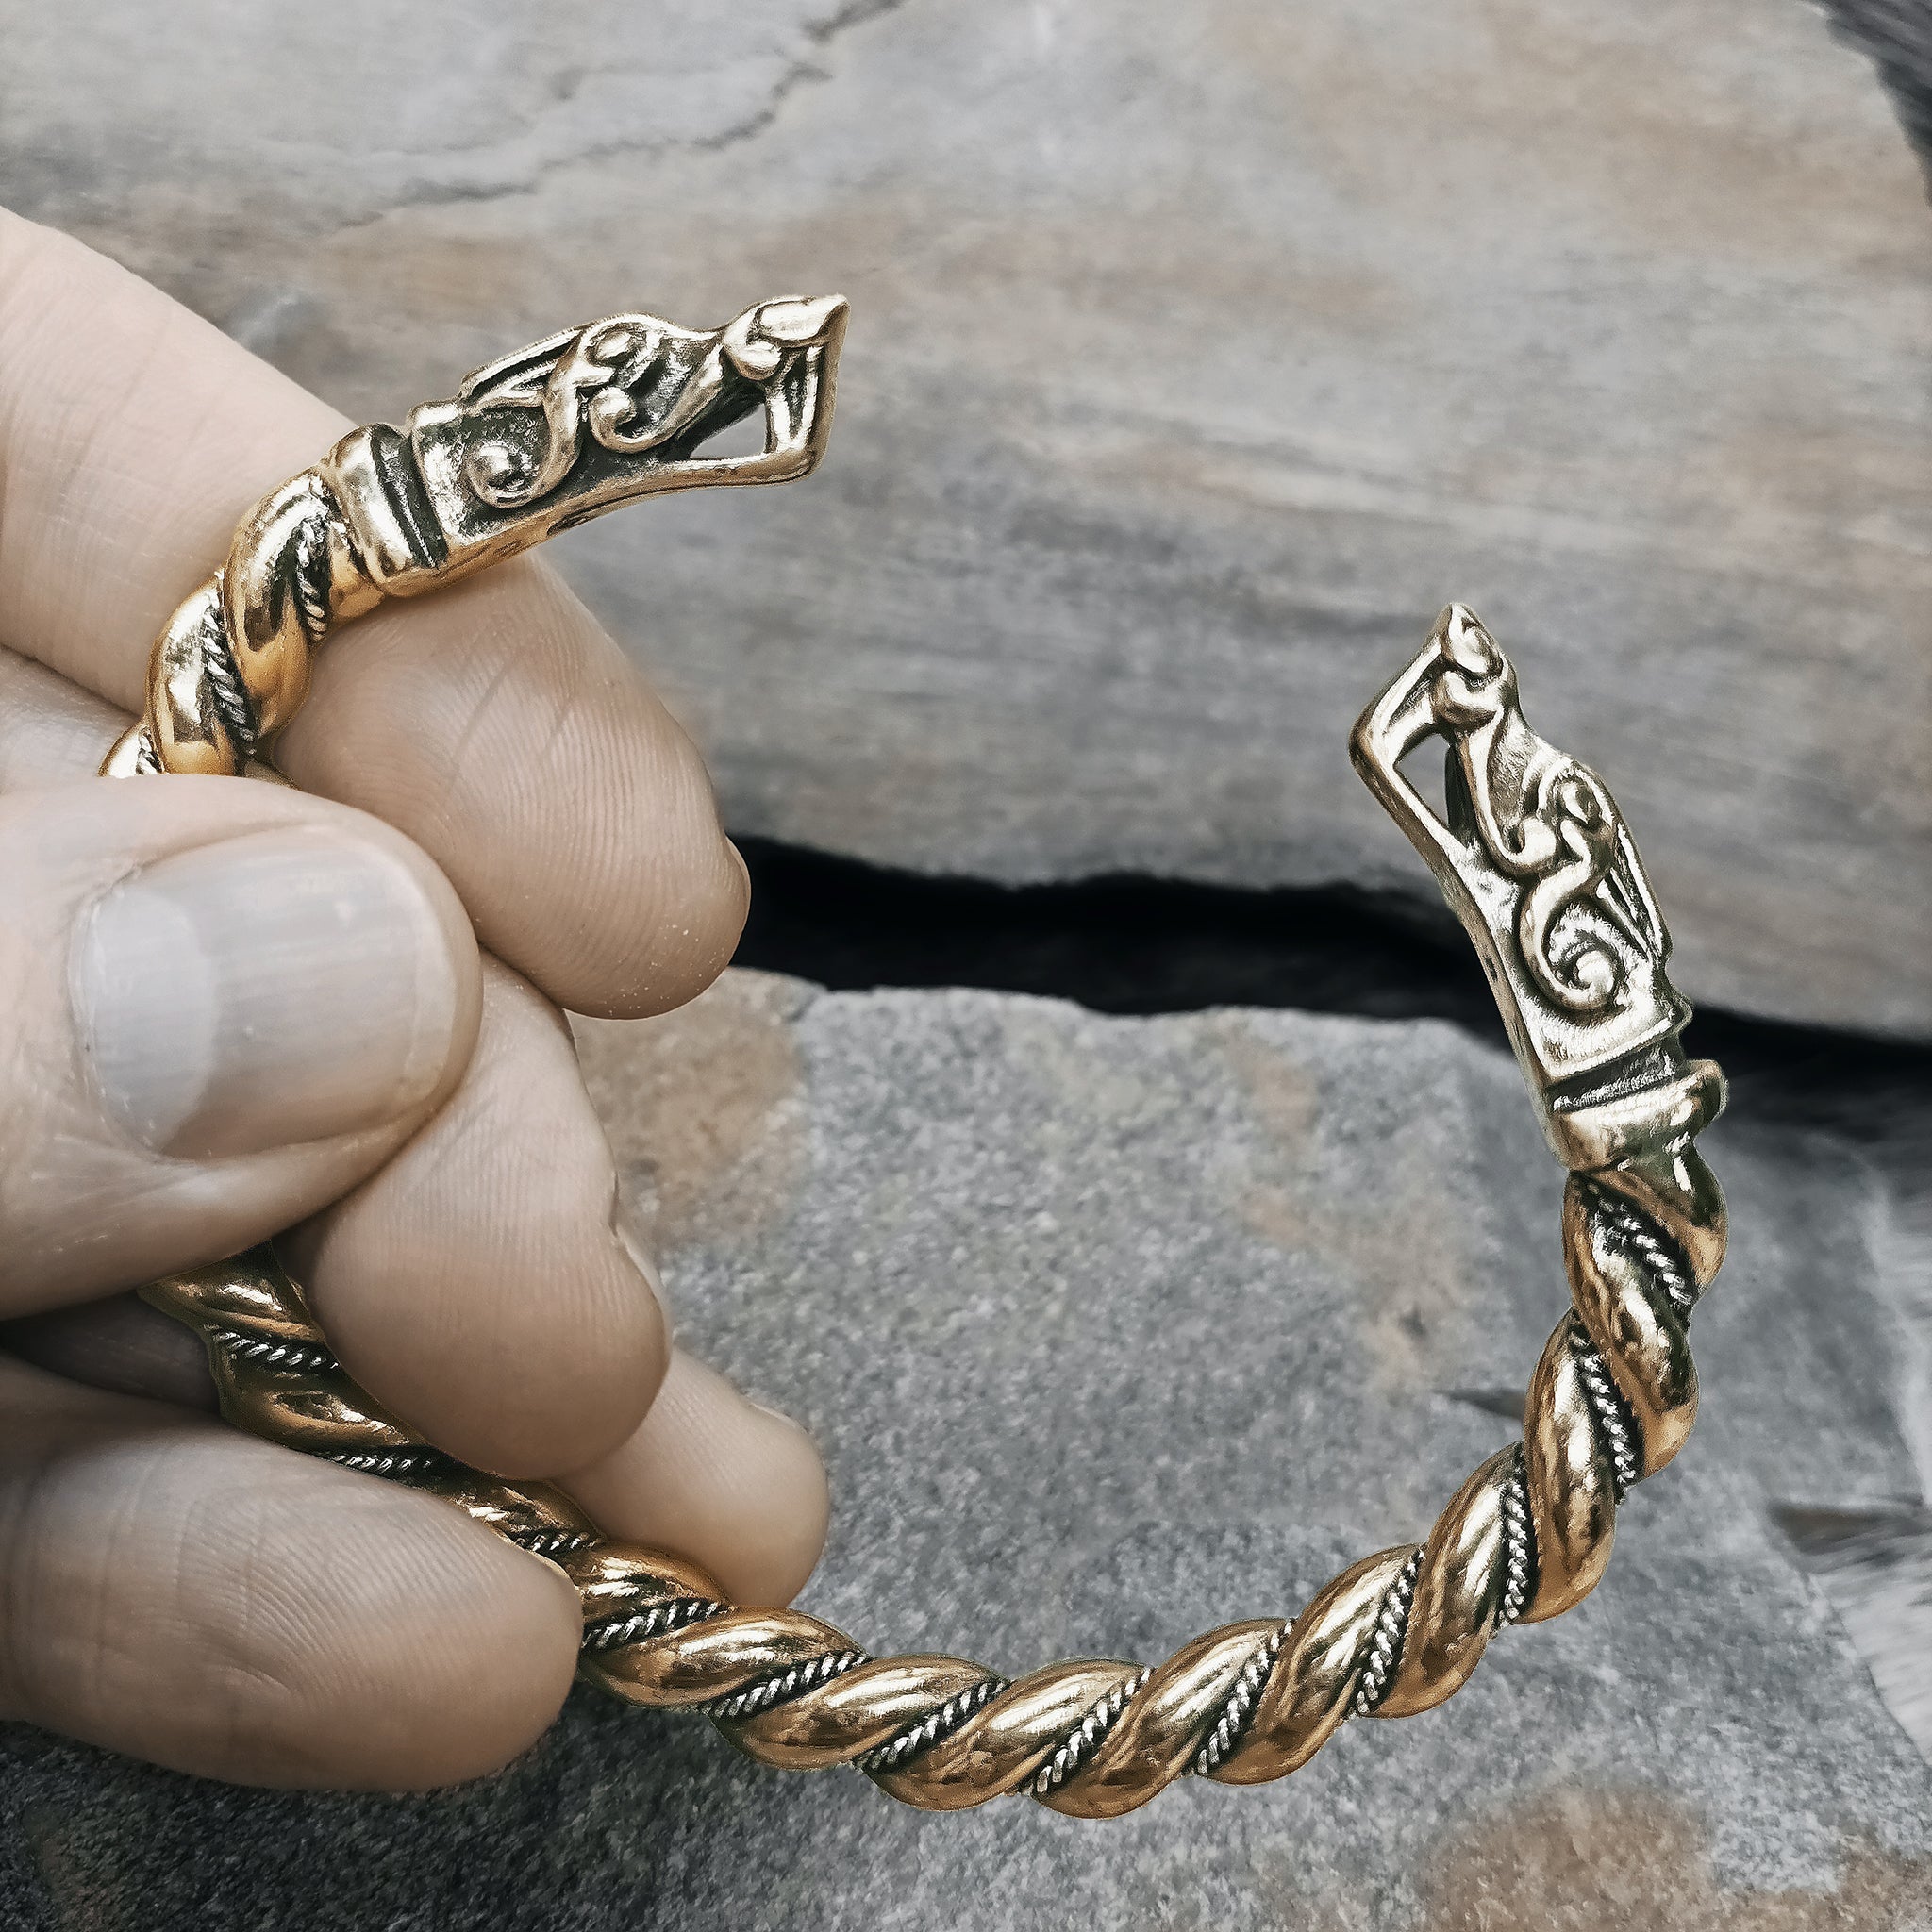 Twisted Bronze and Silver Bracelet With Gotlandic Dragon Heads in Fingers